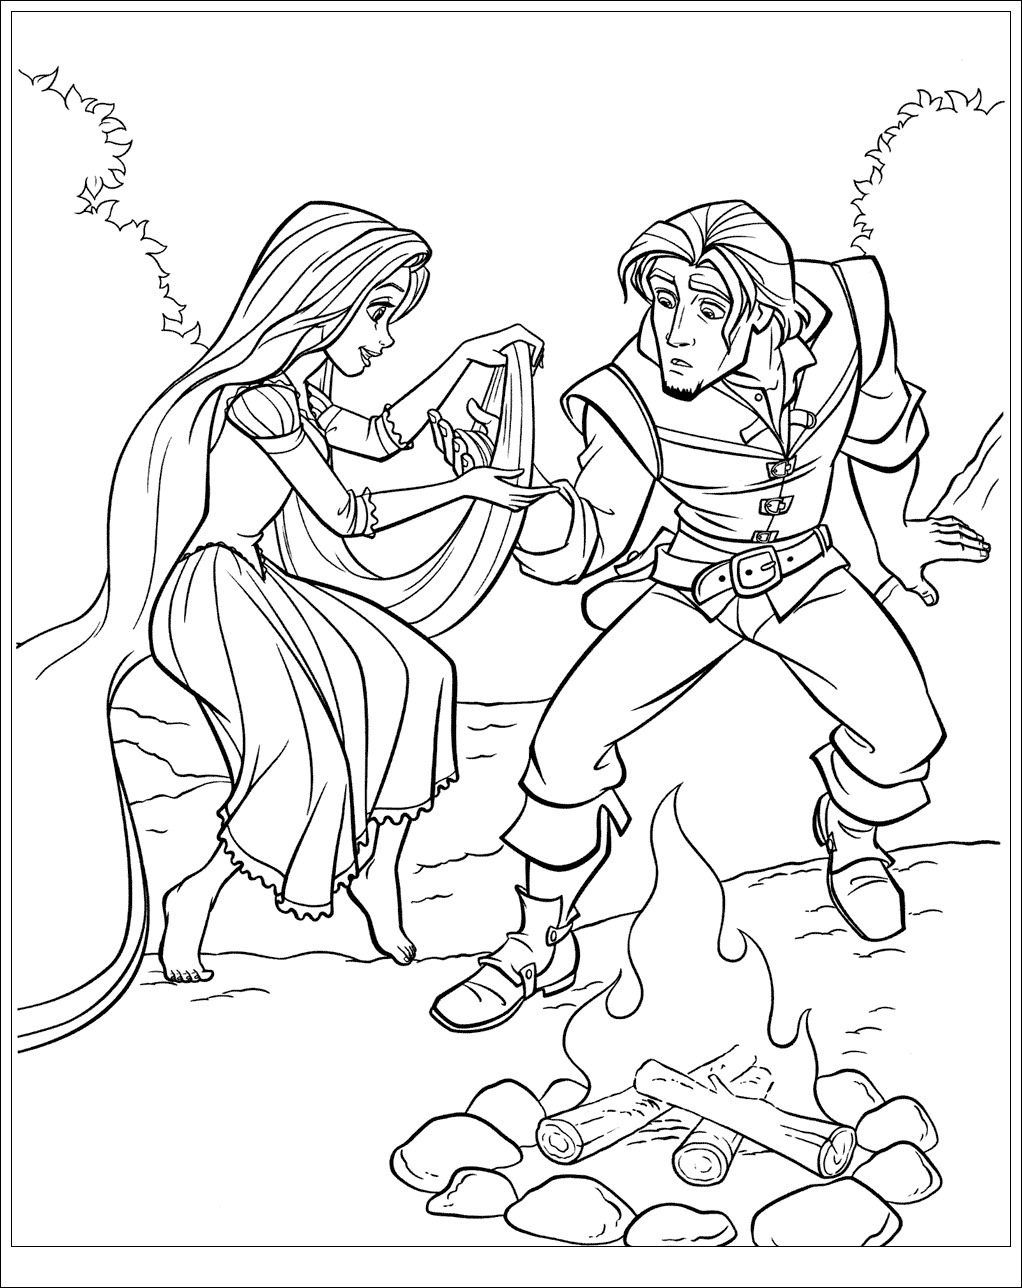 Rapunzel gives Flynn first aid Coloring Page